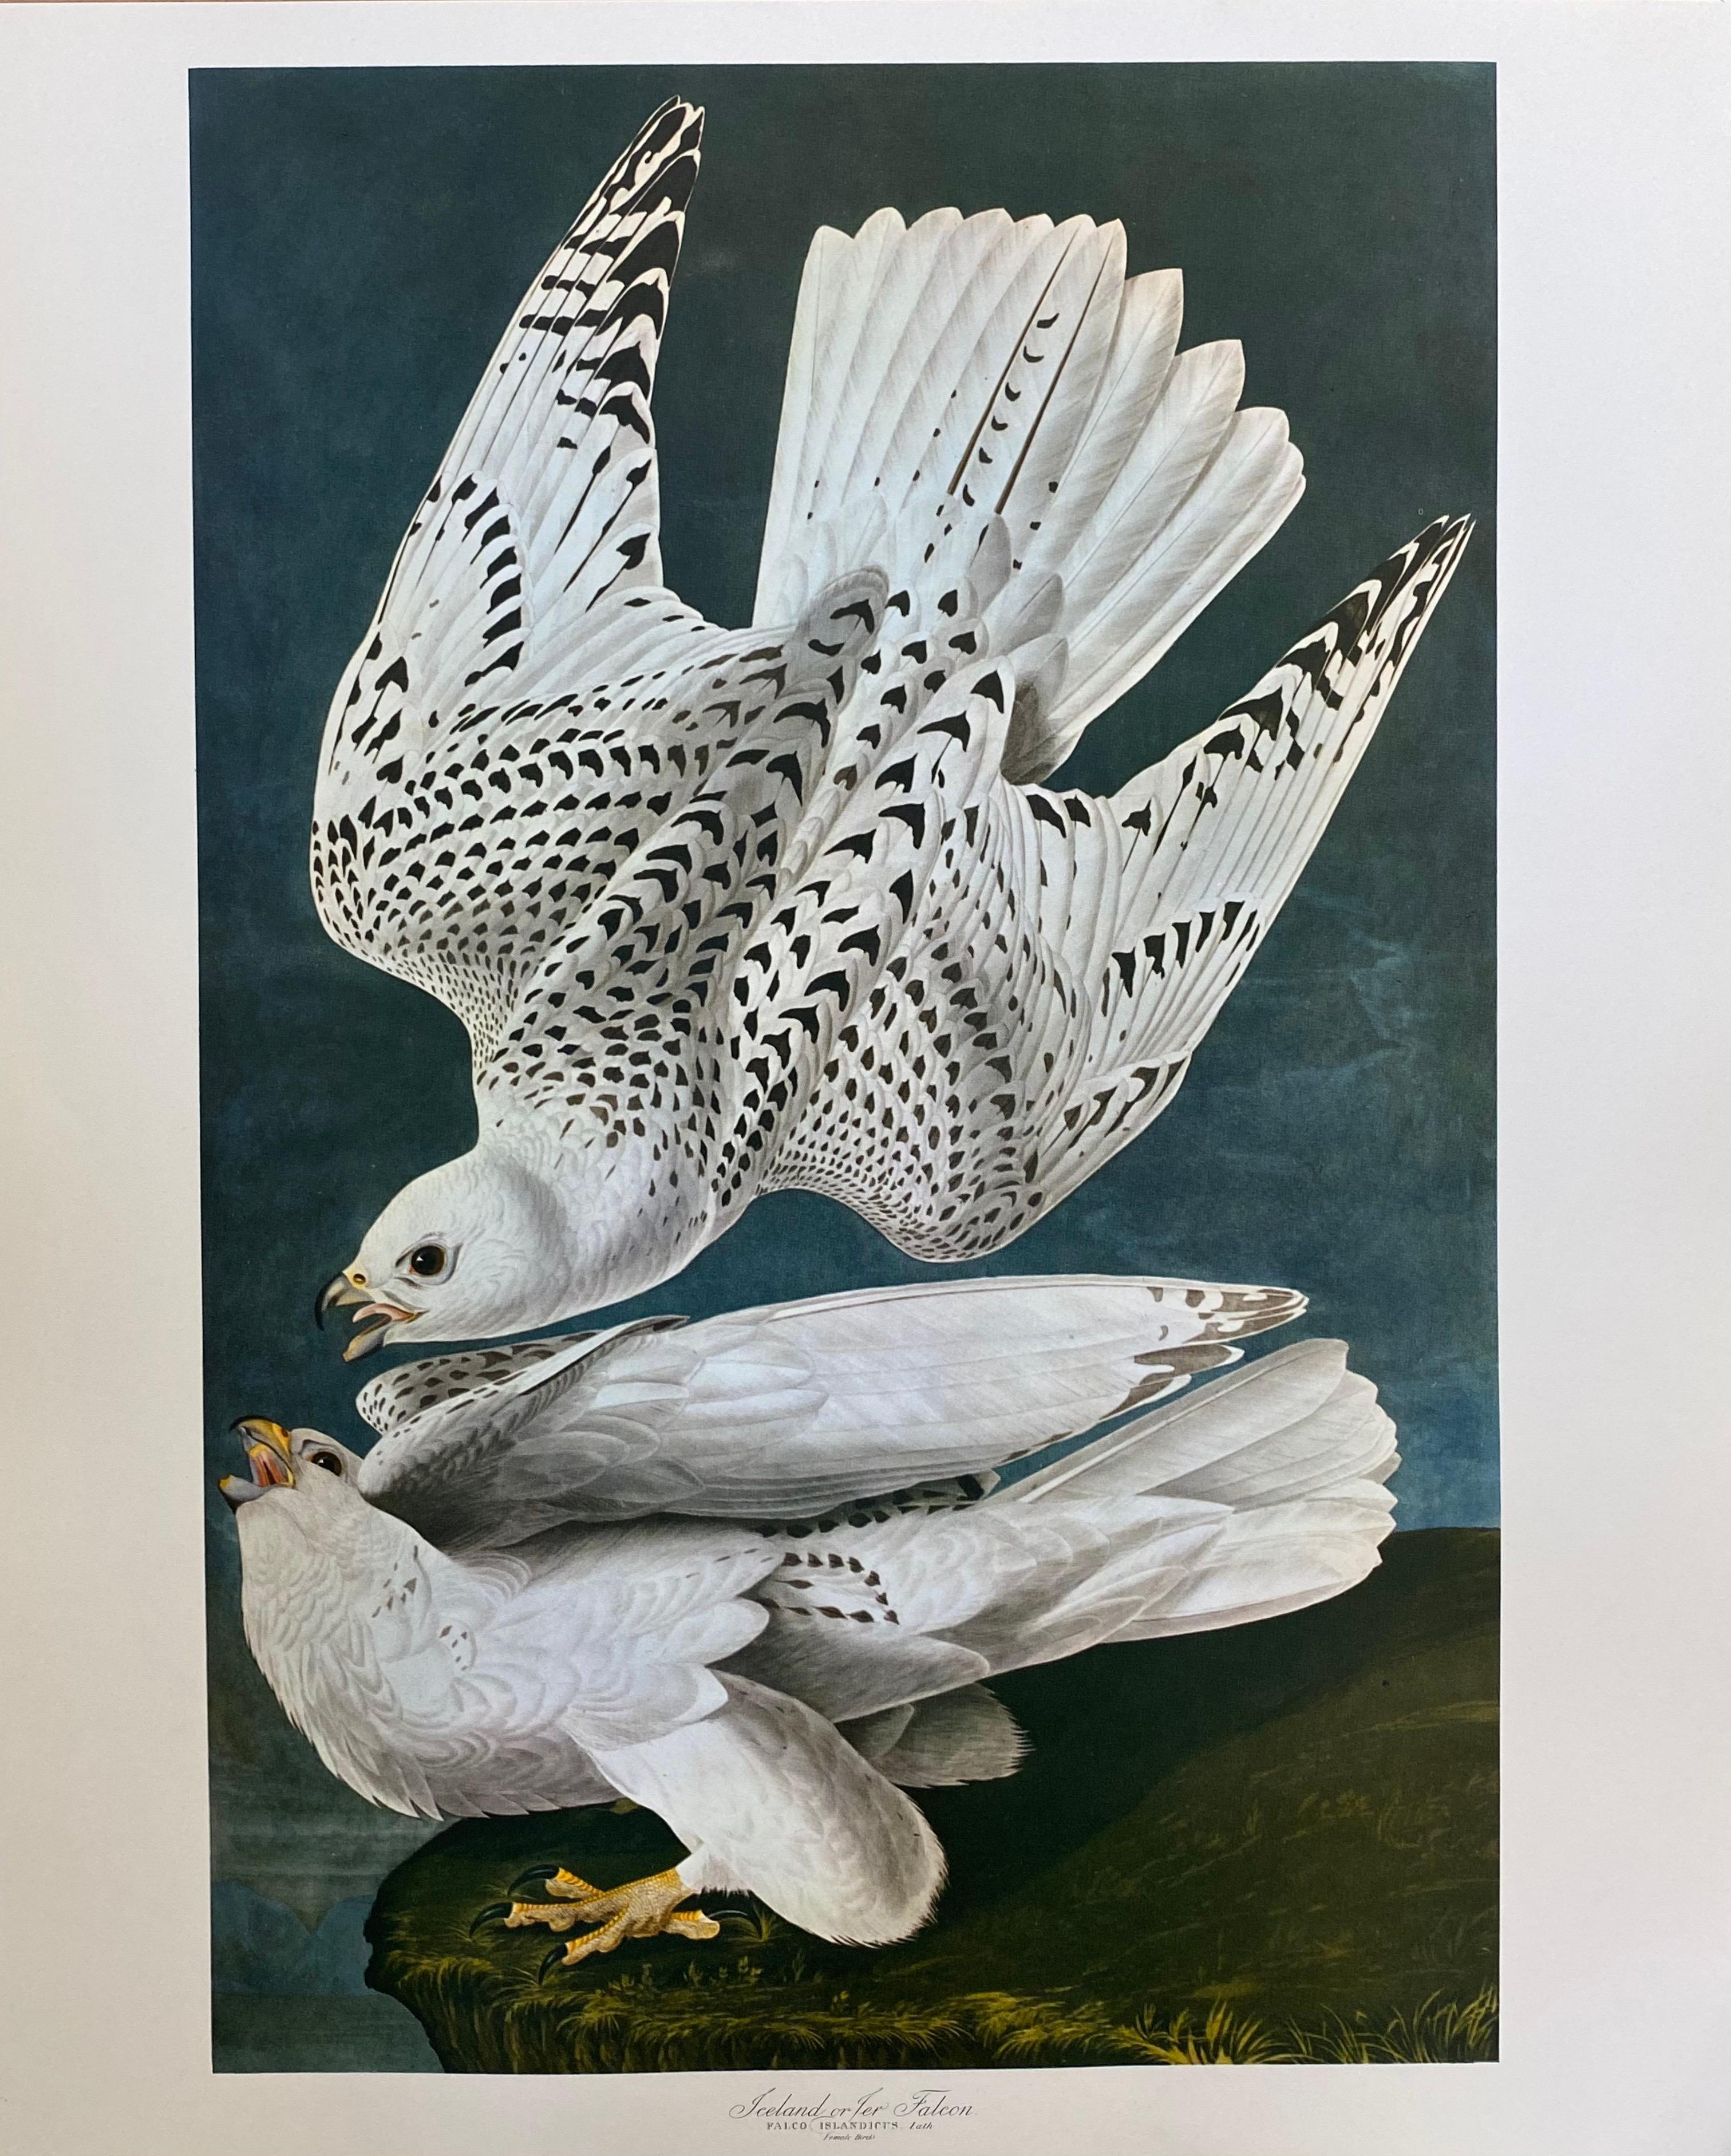 Classical Bird print, 
after John James Audubon, 
printed by Harry N. Abrams, Publishers, New York
unframed, 17 x 14 inches color print on paper
condition: very good
provenance: from a private collector here in the UK. 

Free Shipping